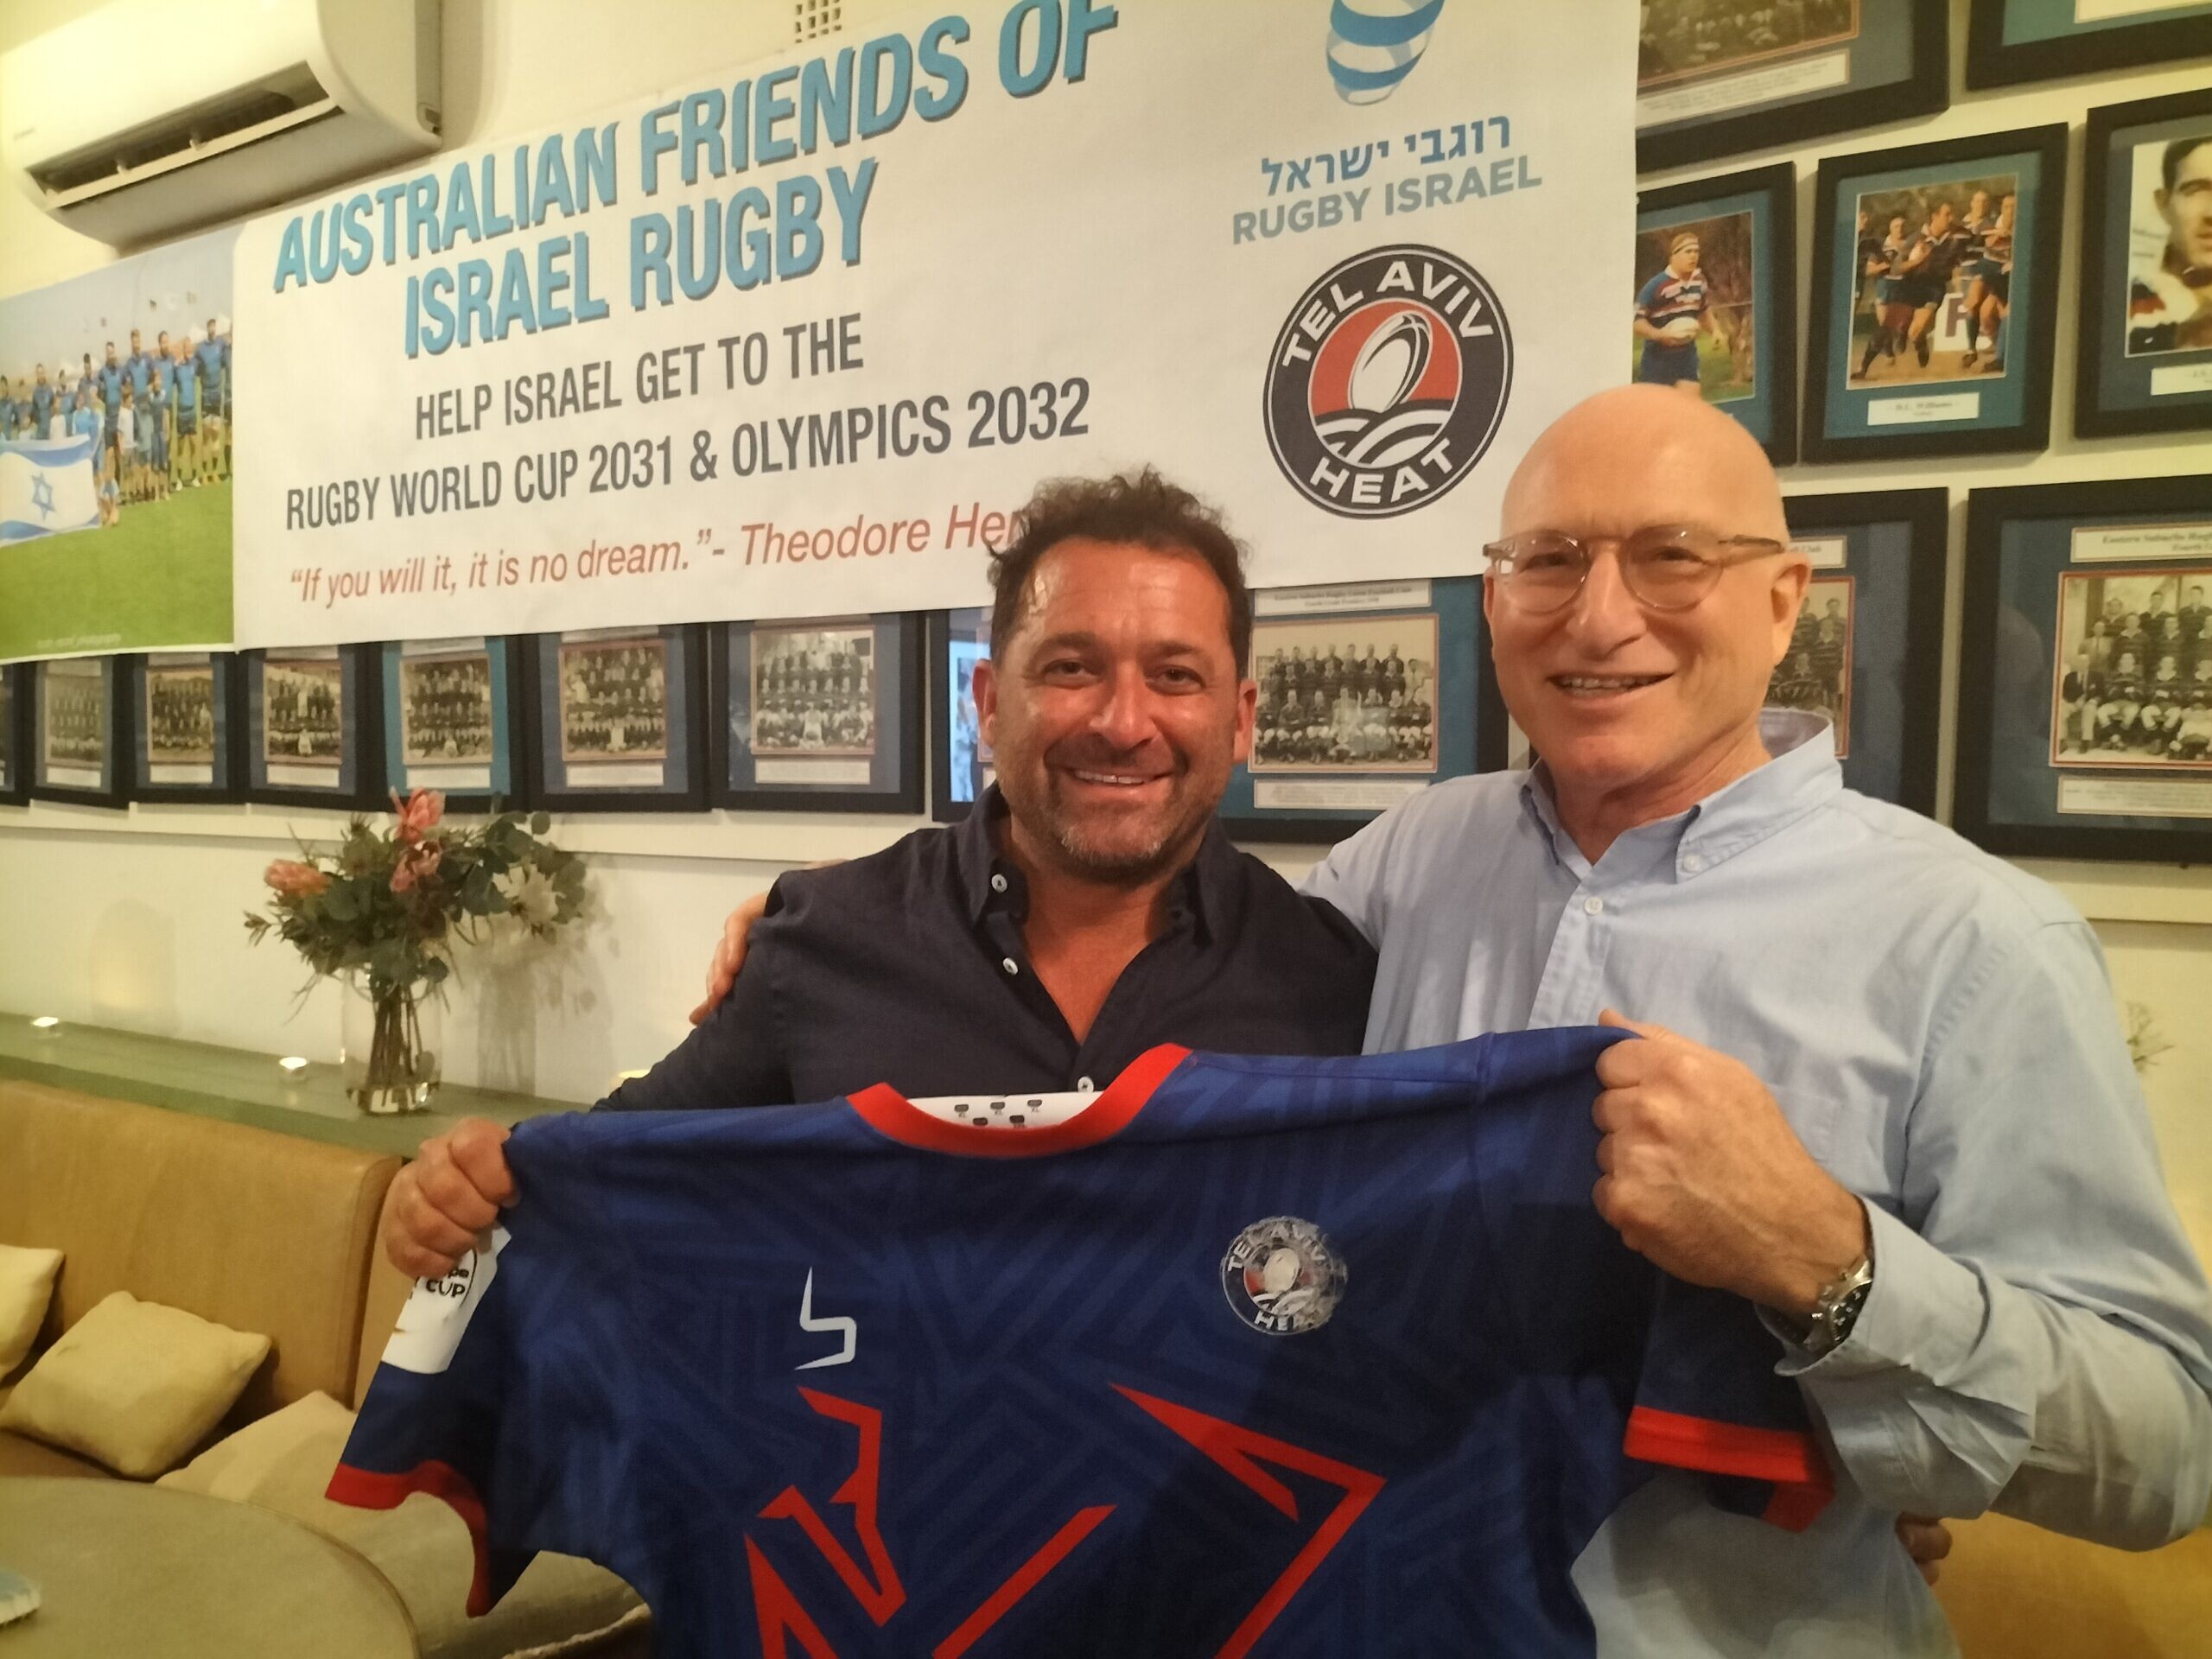 How Aussies can help Israel’s rugby world cup goal